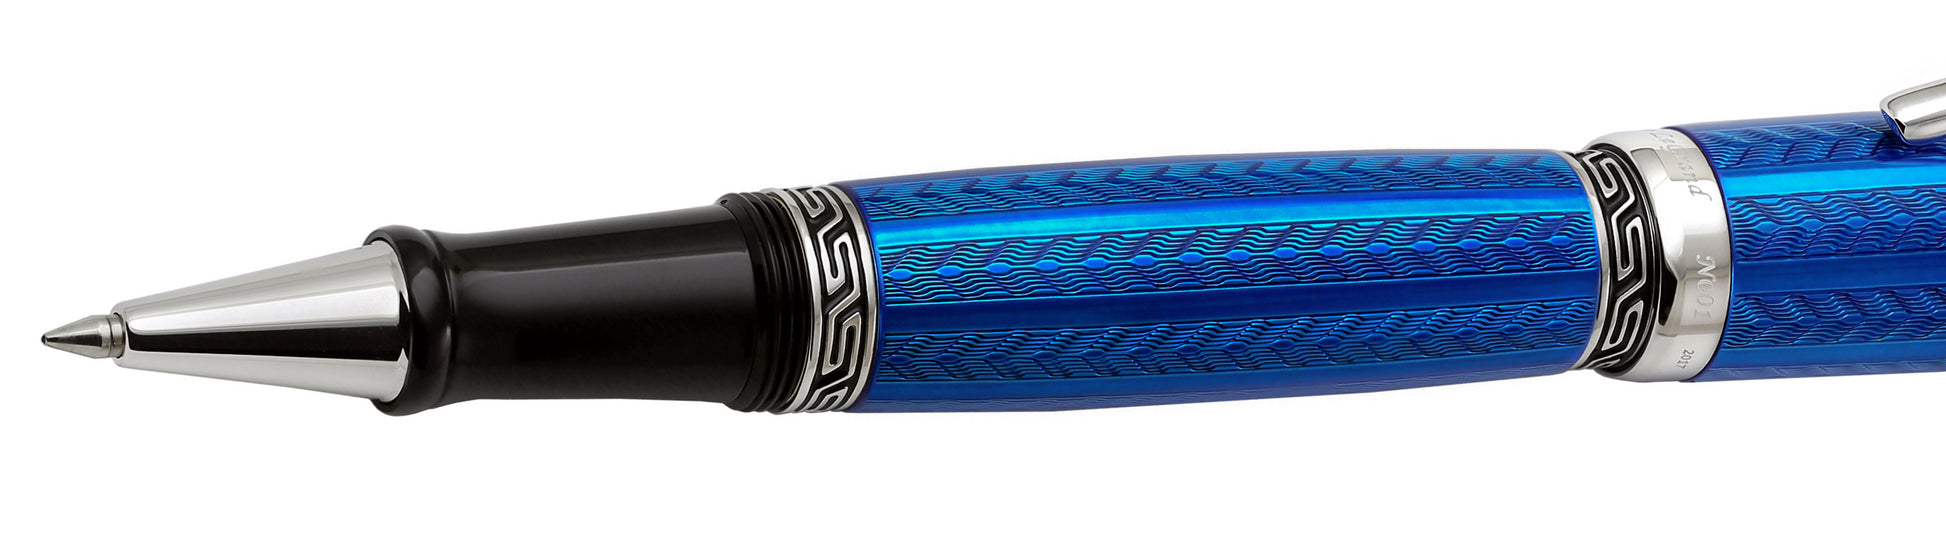 Xezo - Tip, patterned middle ring, and textured body of the Maestro LeGrand Tanzanite R rollerball pen